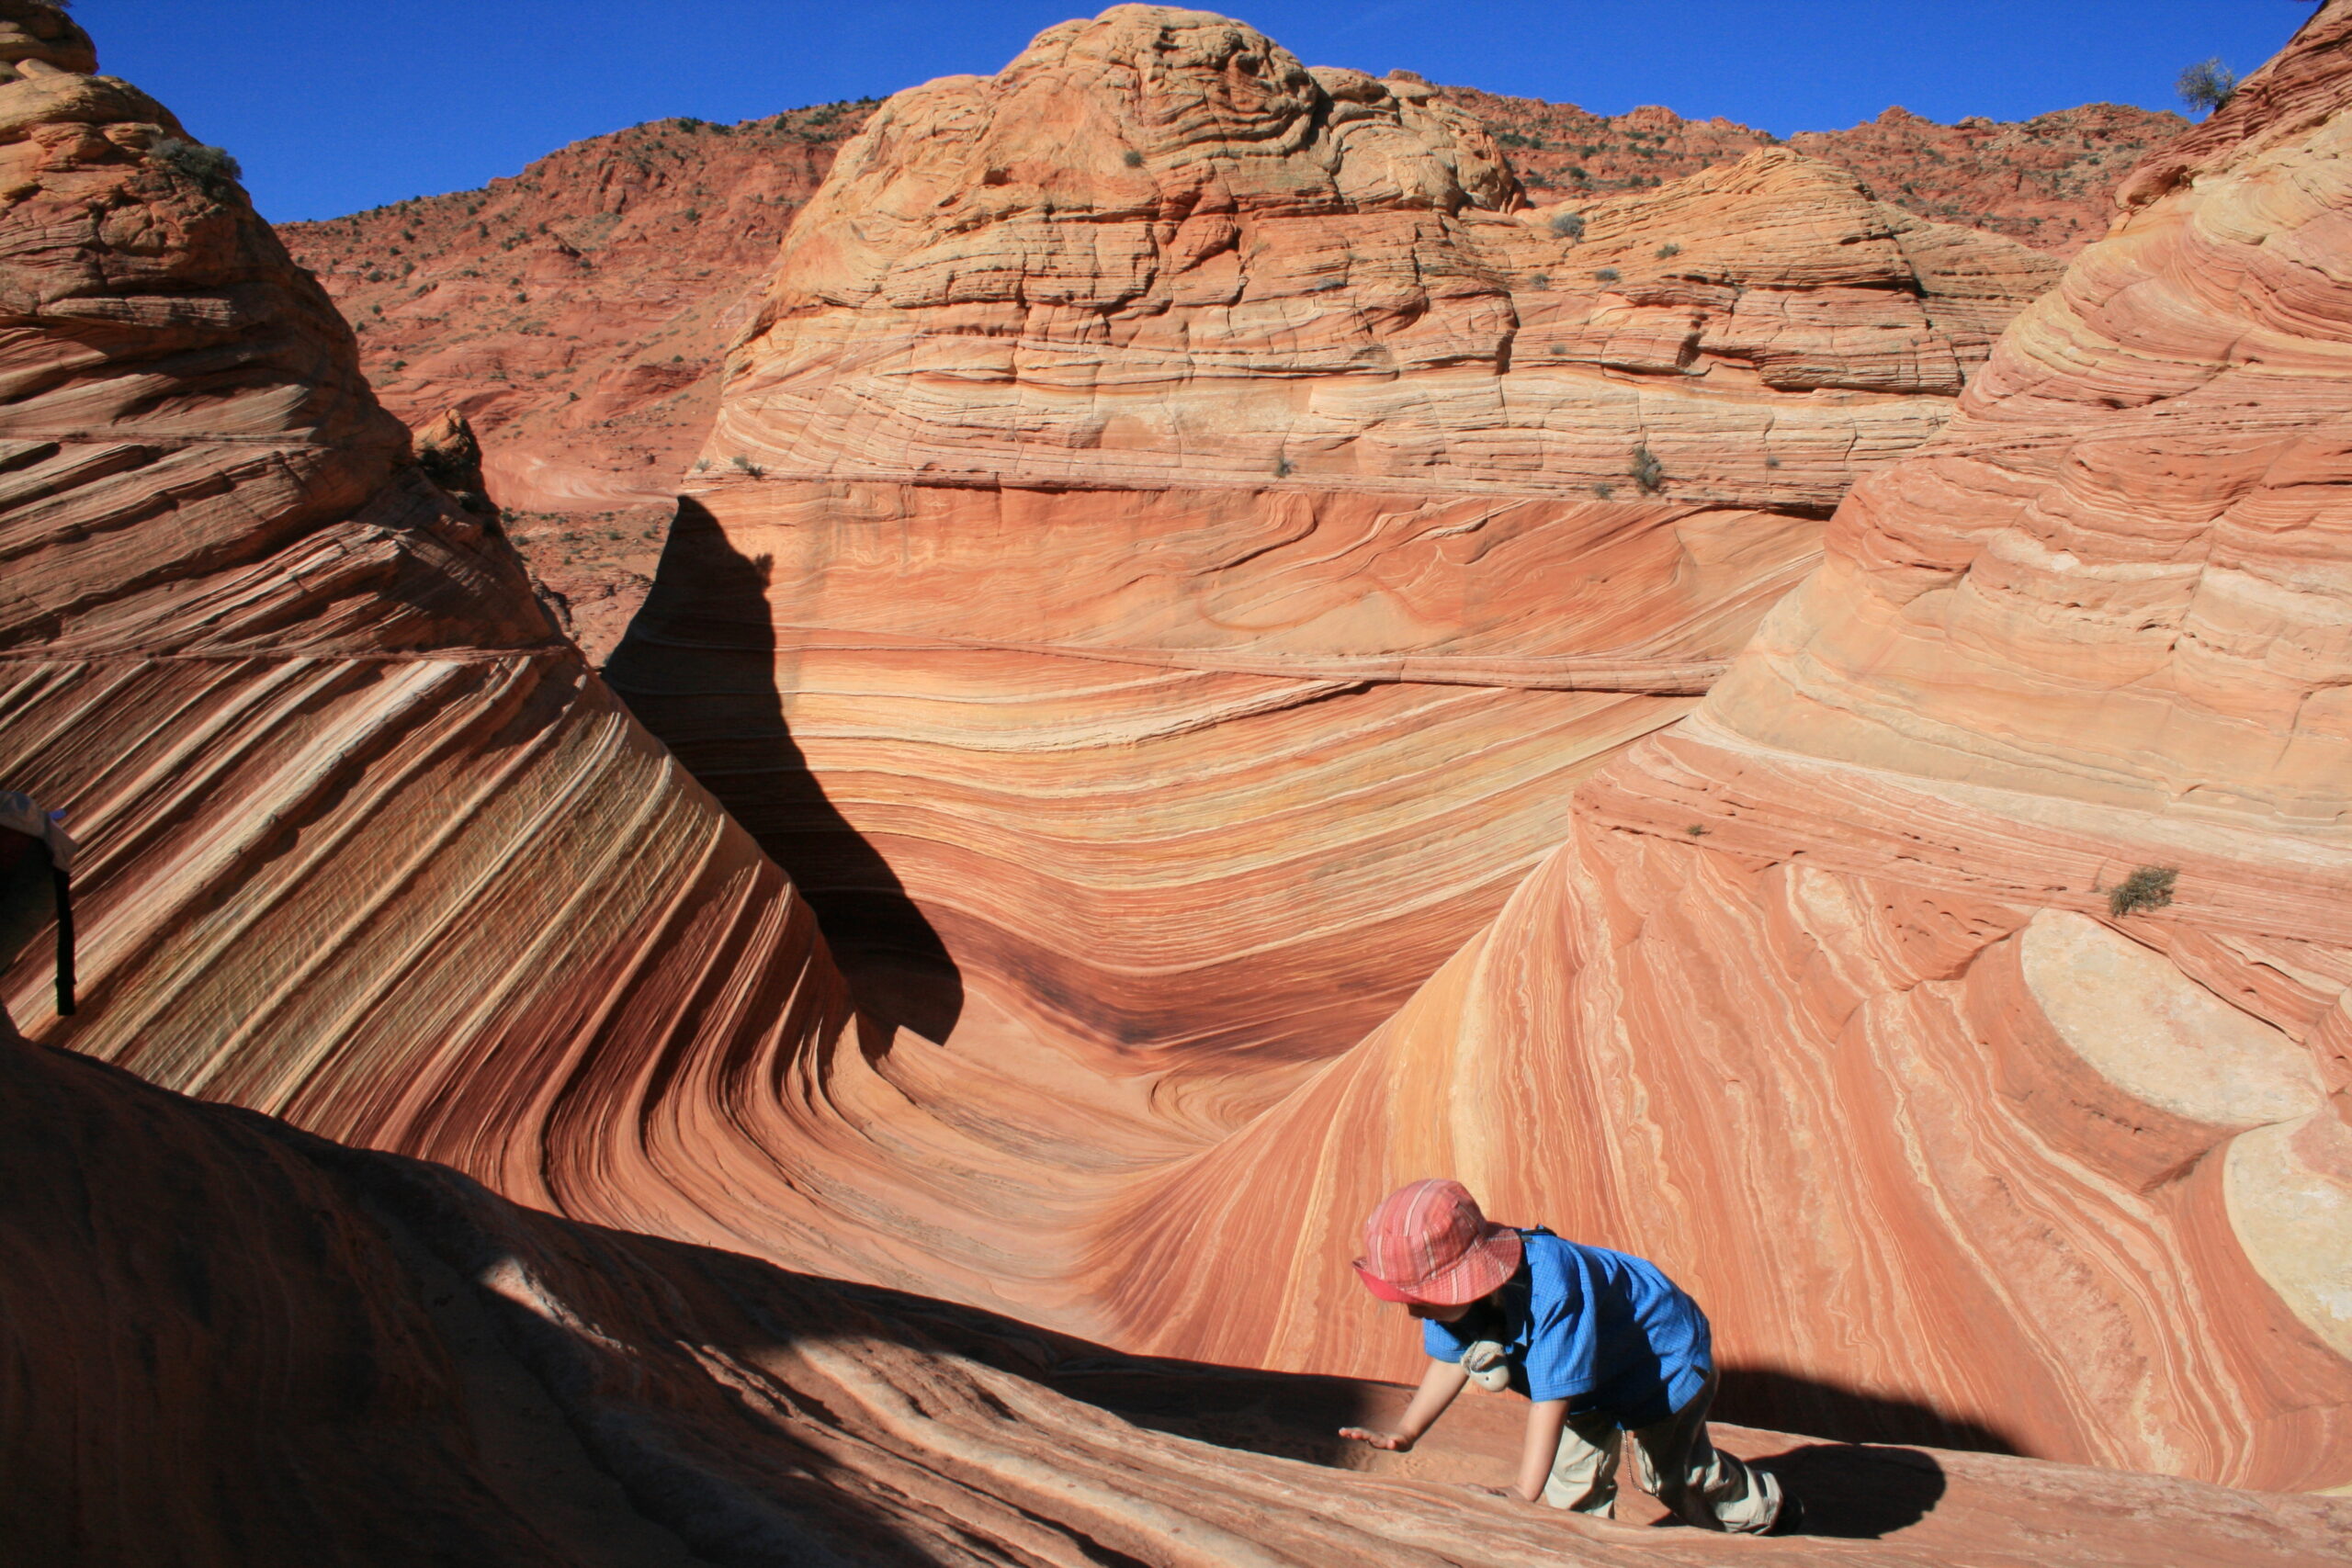 A child crawls on the red-orange sandstone at The Wave.